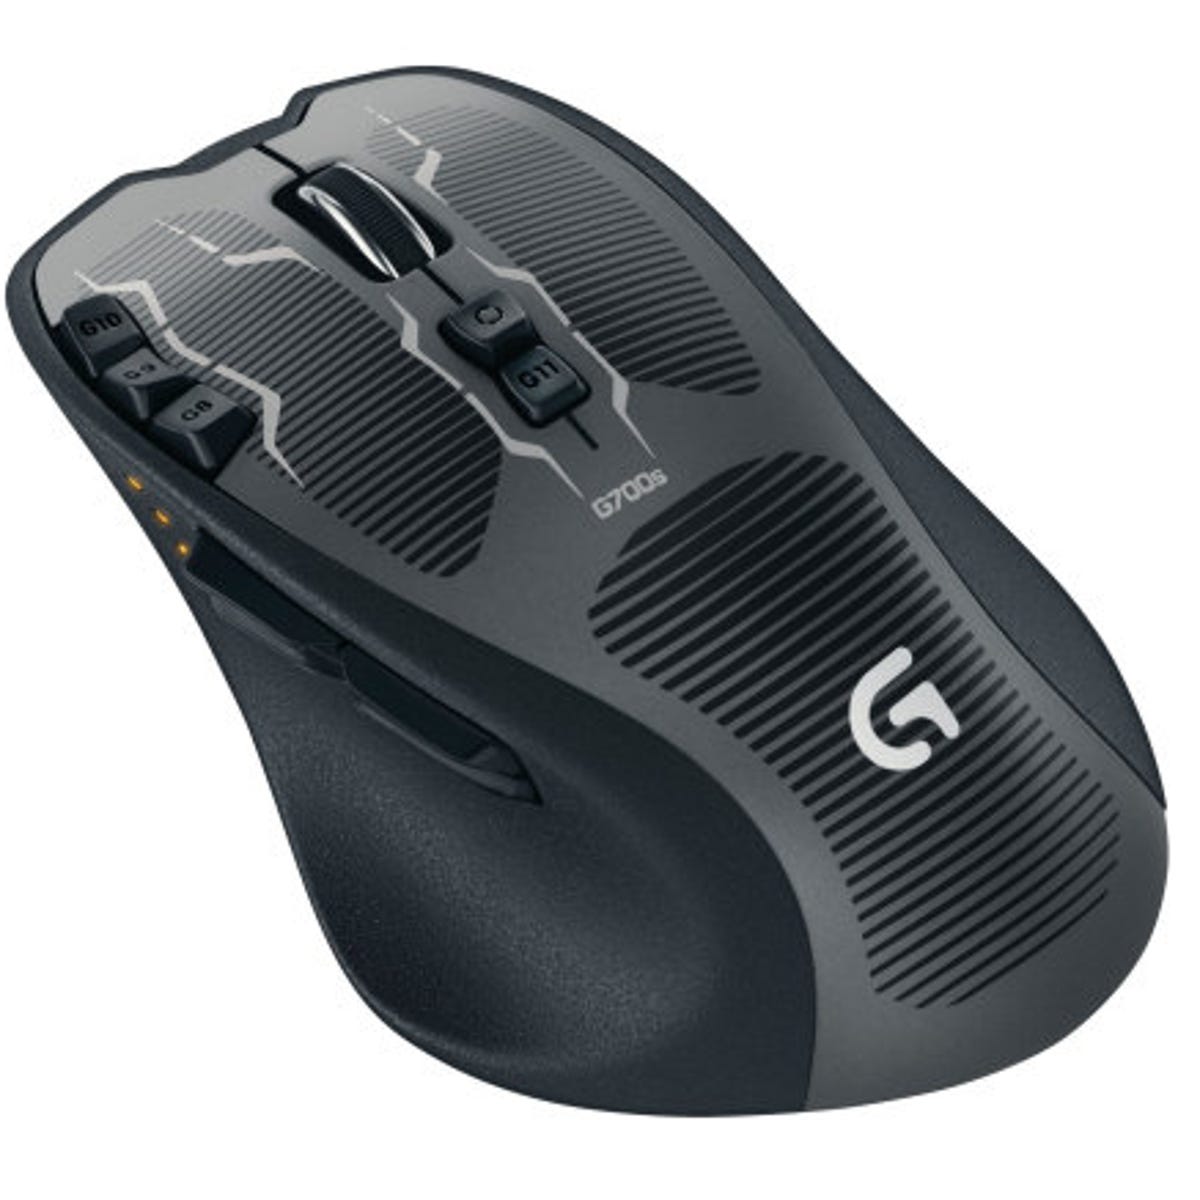 Læs Instruere ejer Logitech thanks science for new 'G' PC gaming accessories - CNET